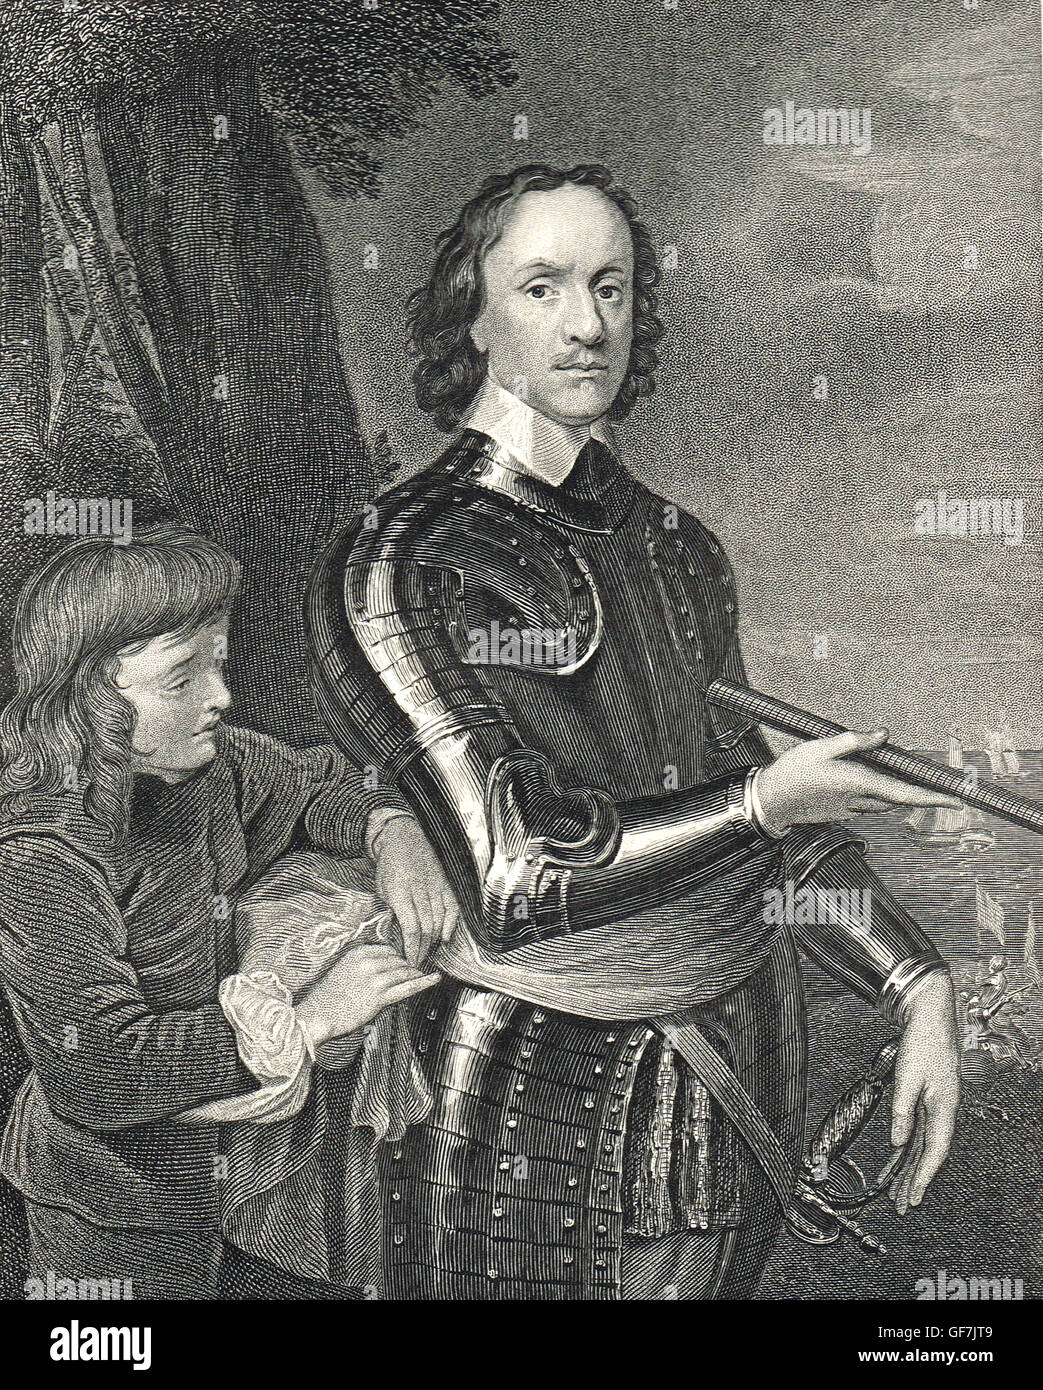 Oliver Cromwell (1599-1658) engraved portrait Stock Photo